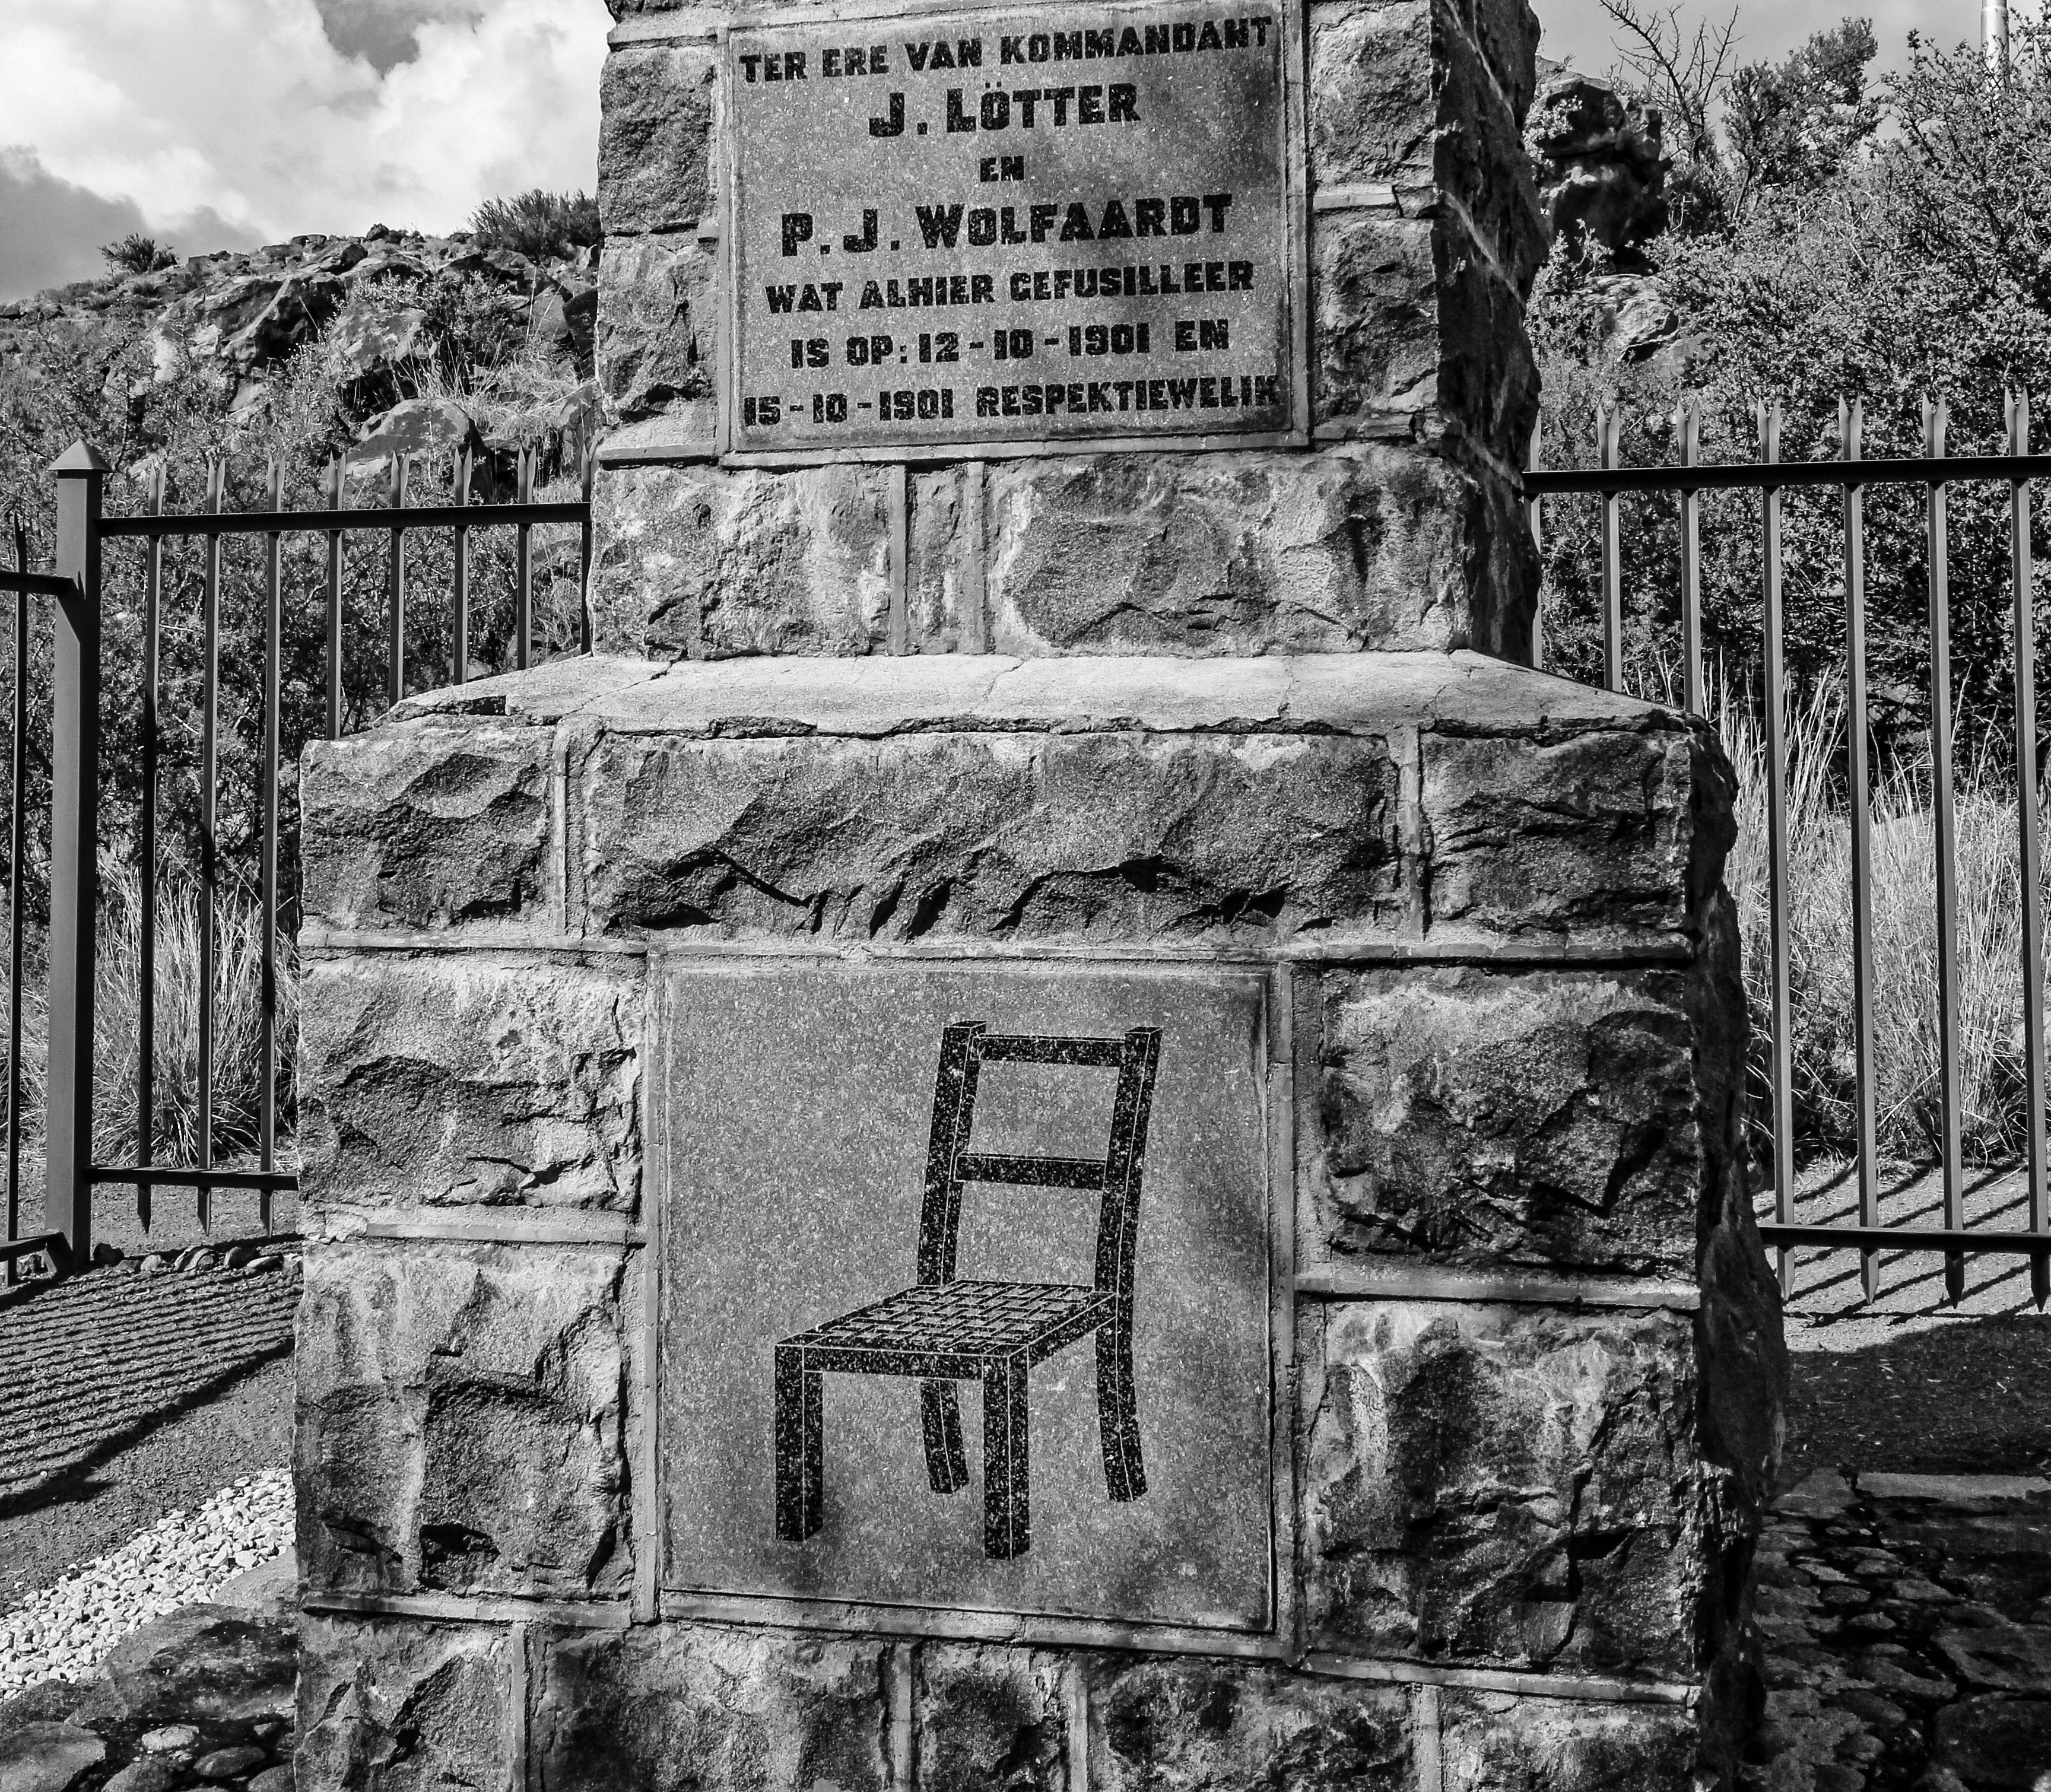 The Anglo-Boer War Execution Chair monument to Commandant J Lotter and PJ Wolfaardt on the outskirts of Middelburg, Karoo 